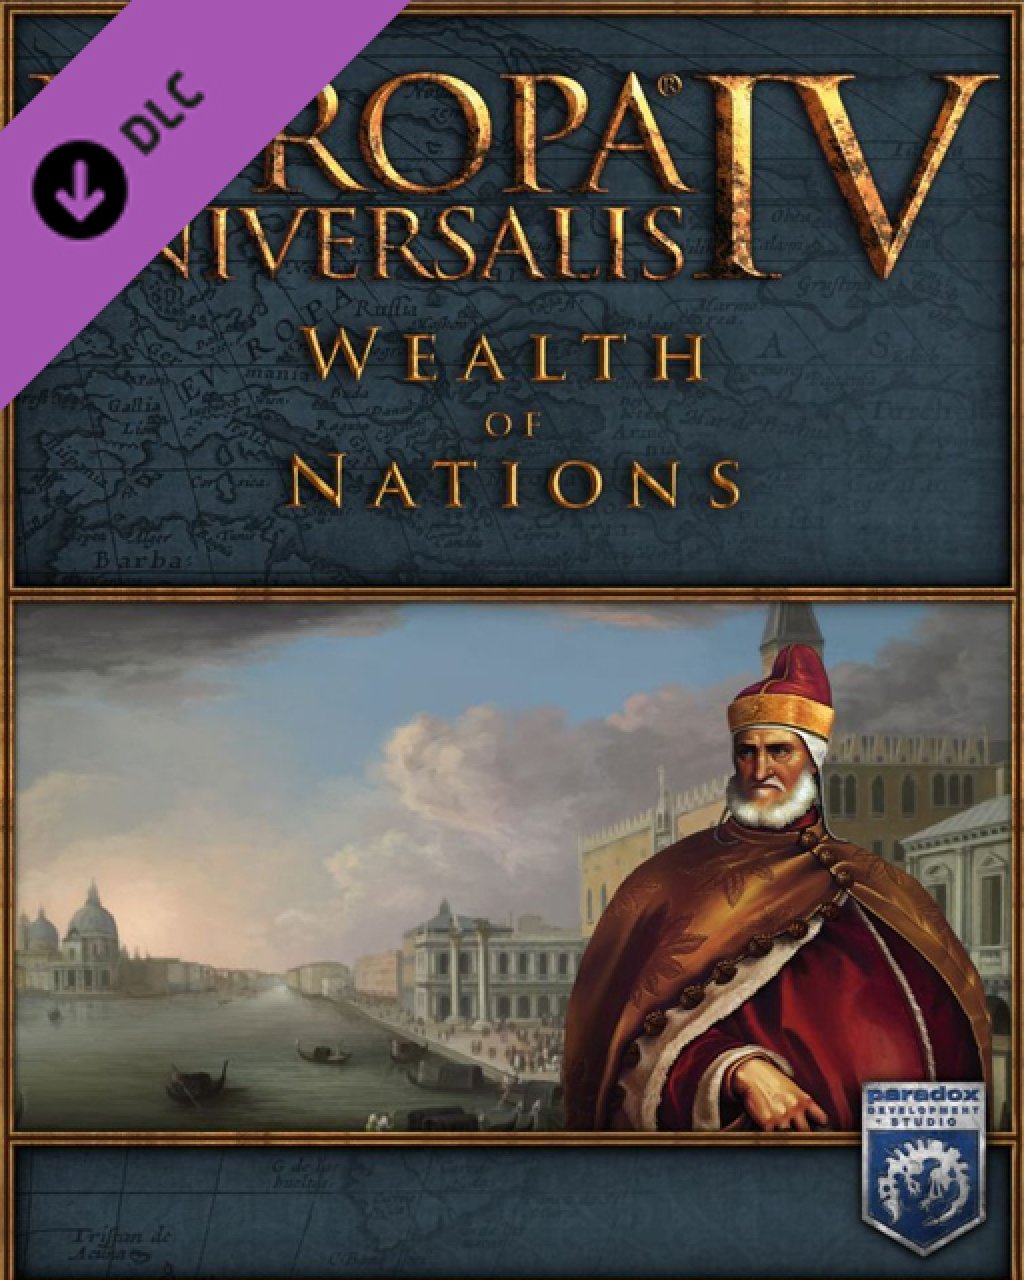 Europa Universalis IV Wealth of Nations